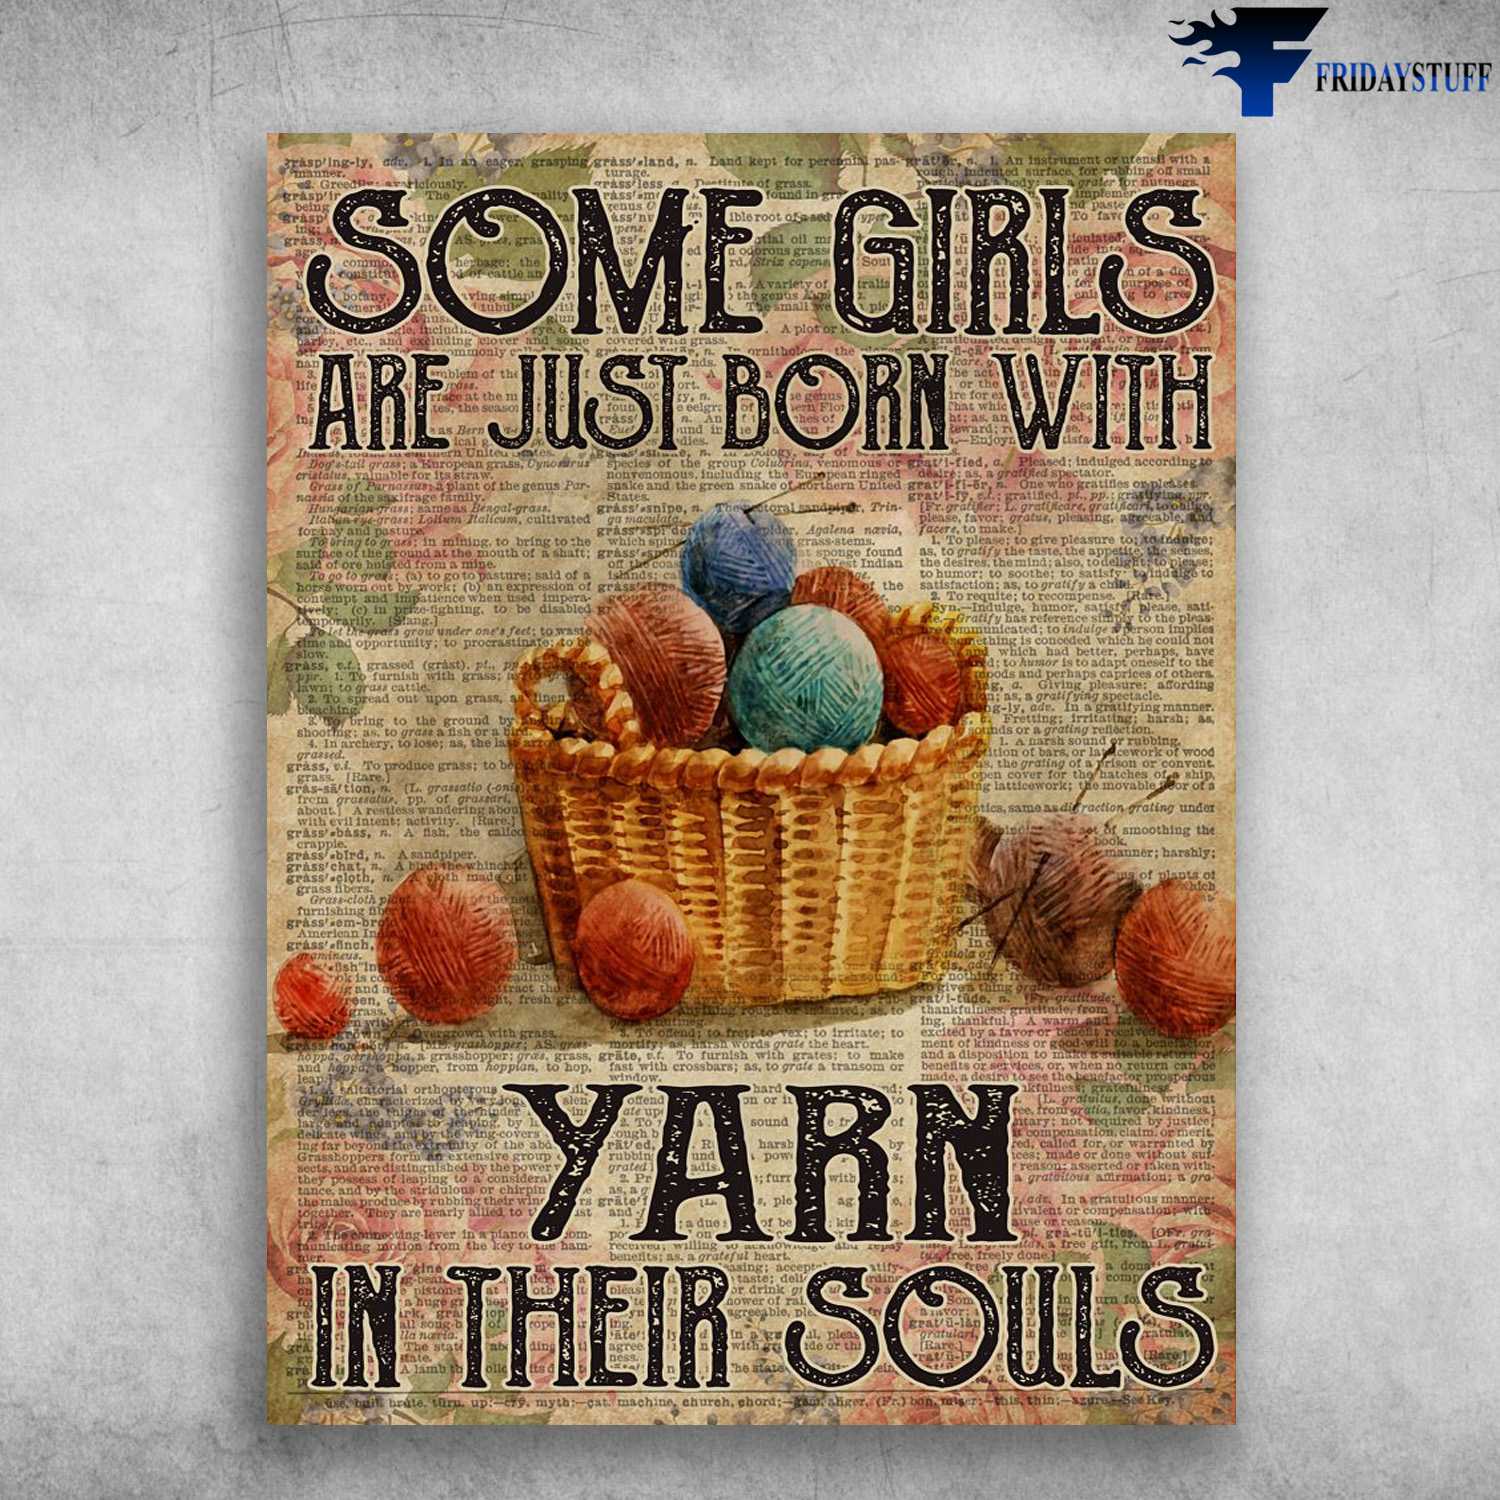 Knitting Poster, Skitting Girls - Some Girls Are Just Born With, Yarn In Their Souls